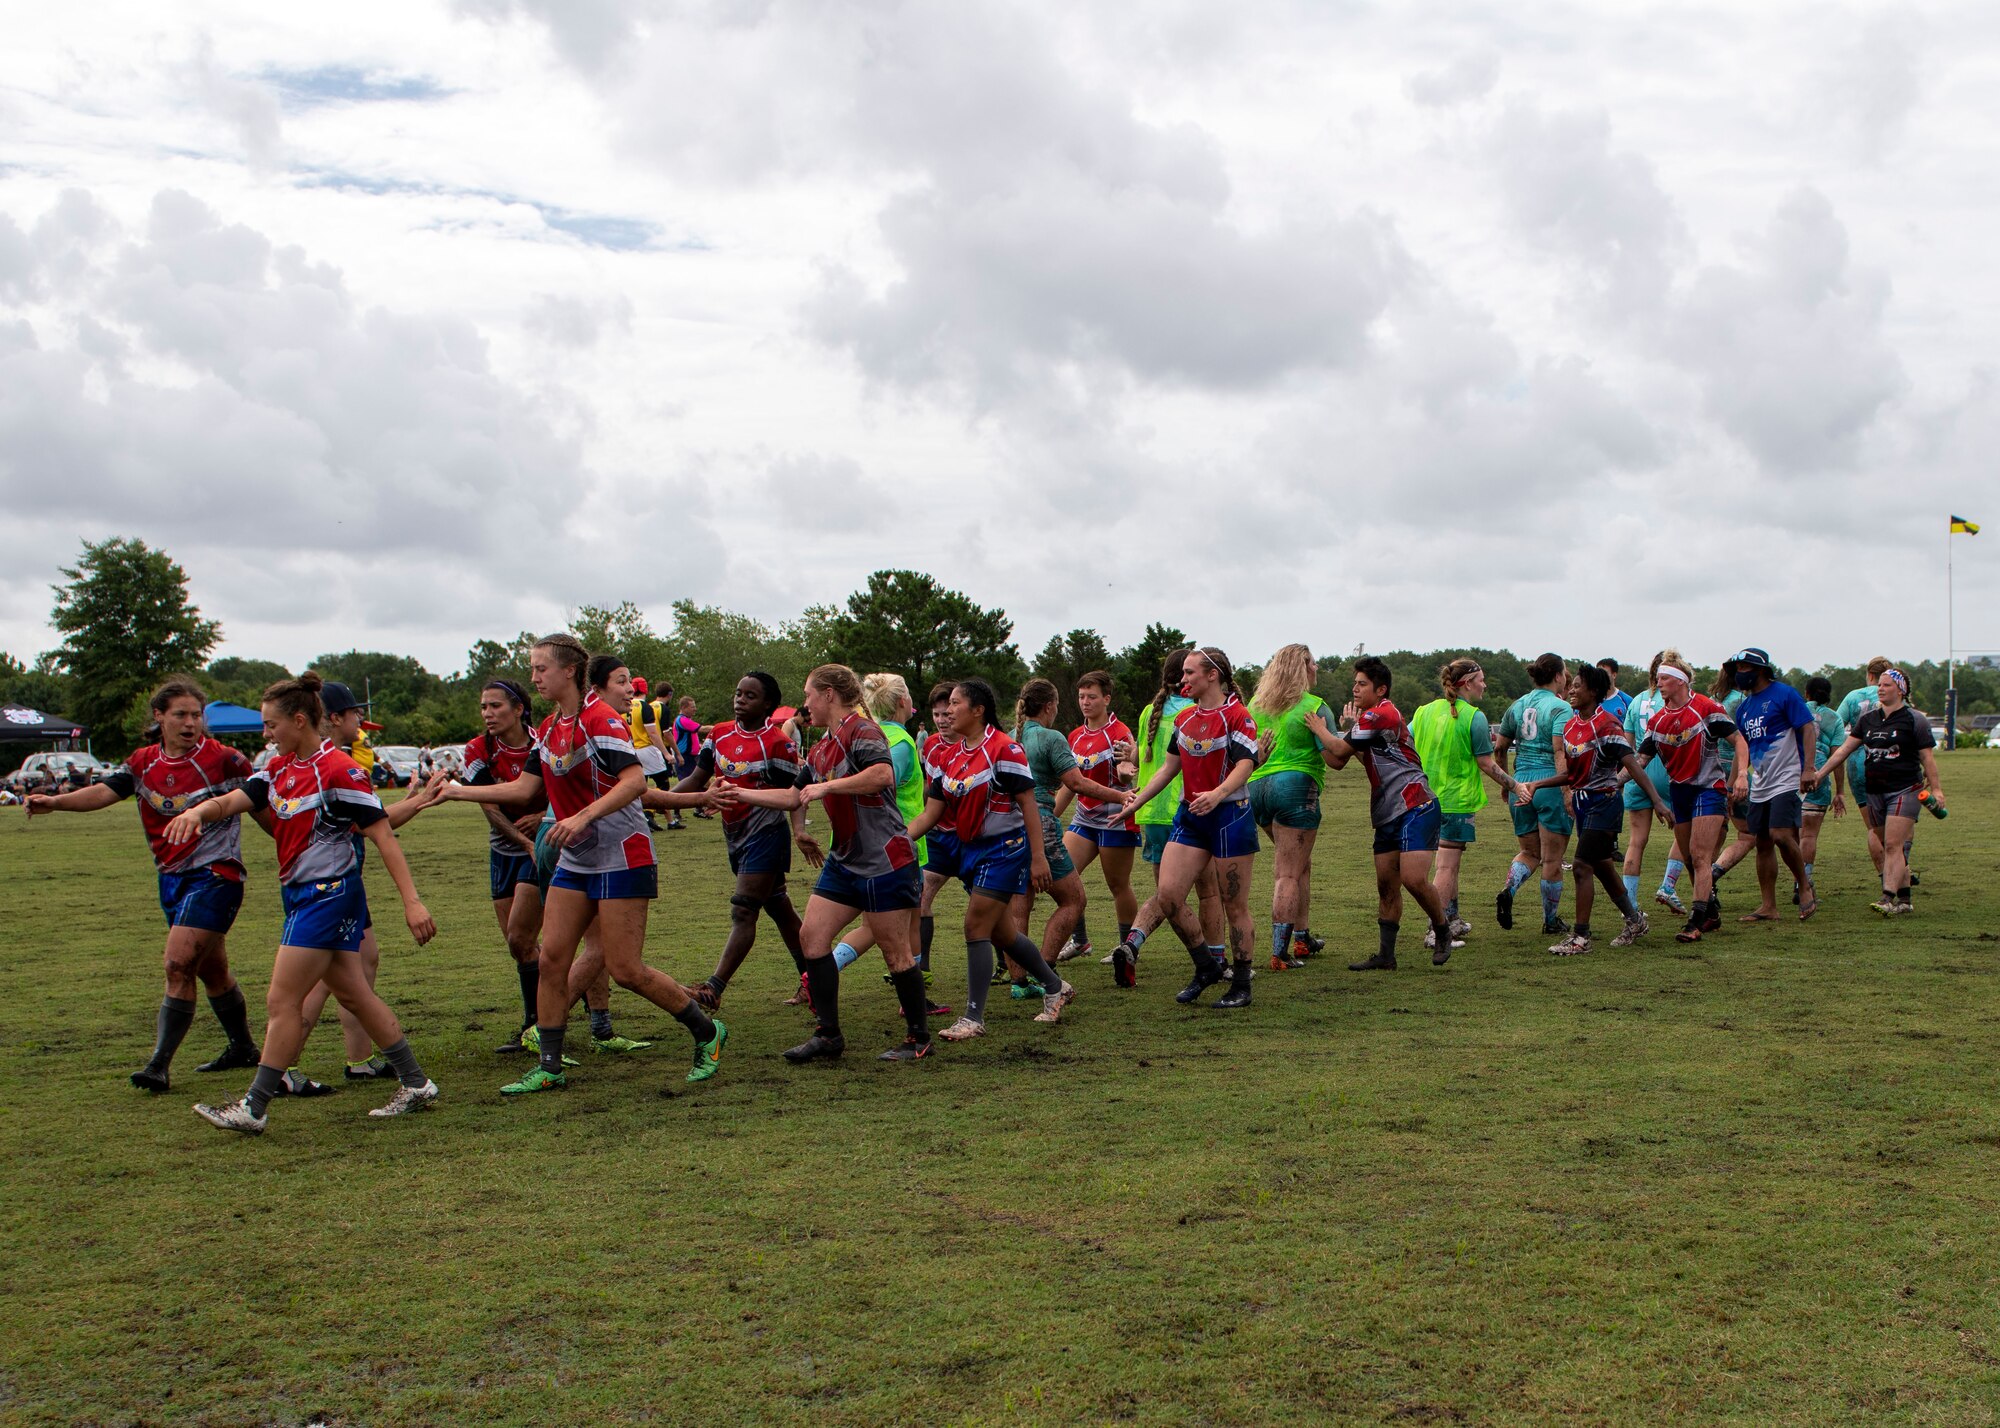 Members of the United States Air Force and Navy women’s rugby teams shake hands after a game at the Annual Armed Forces Women’s Rugby Championship in Wilmington, North Carolina, June 26, 2021.